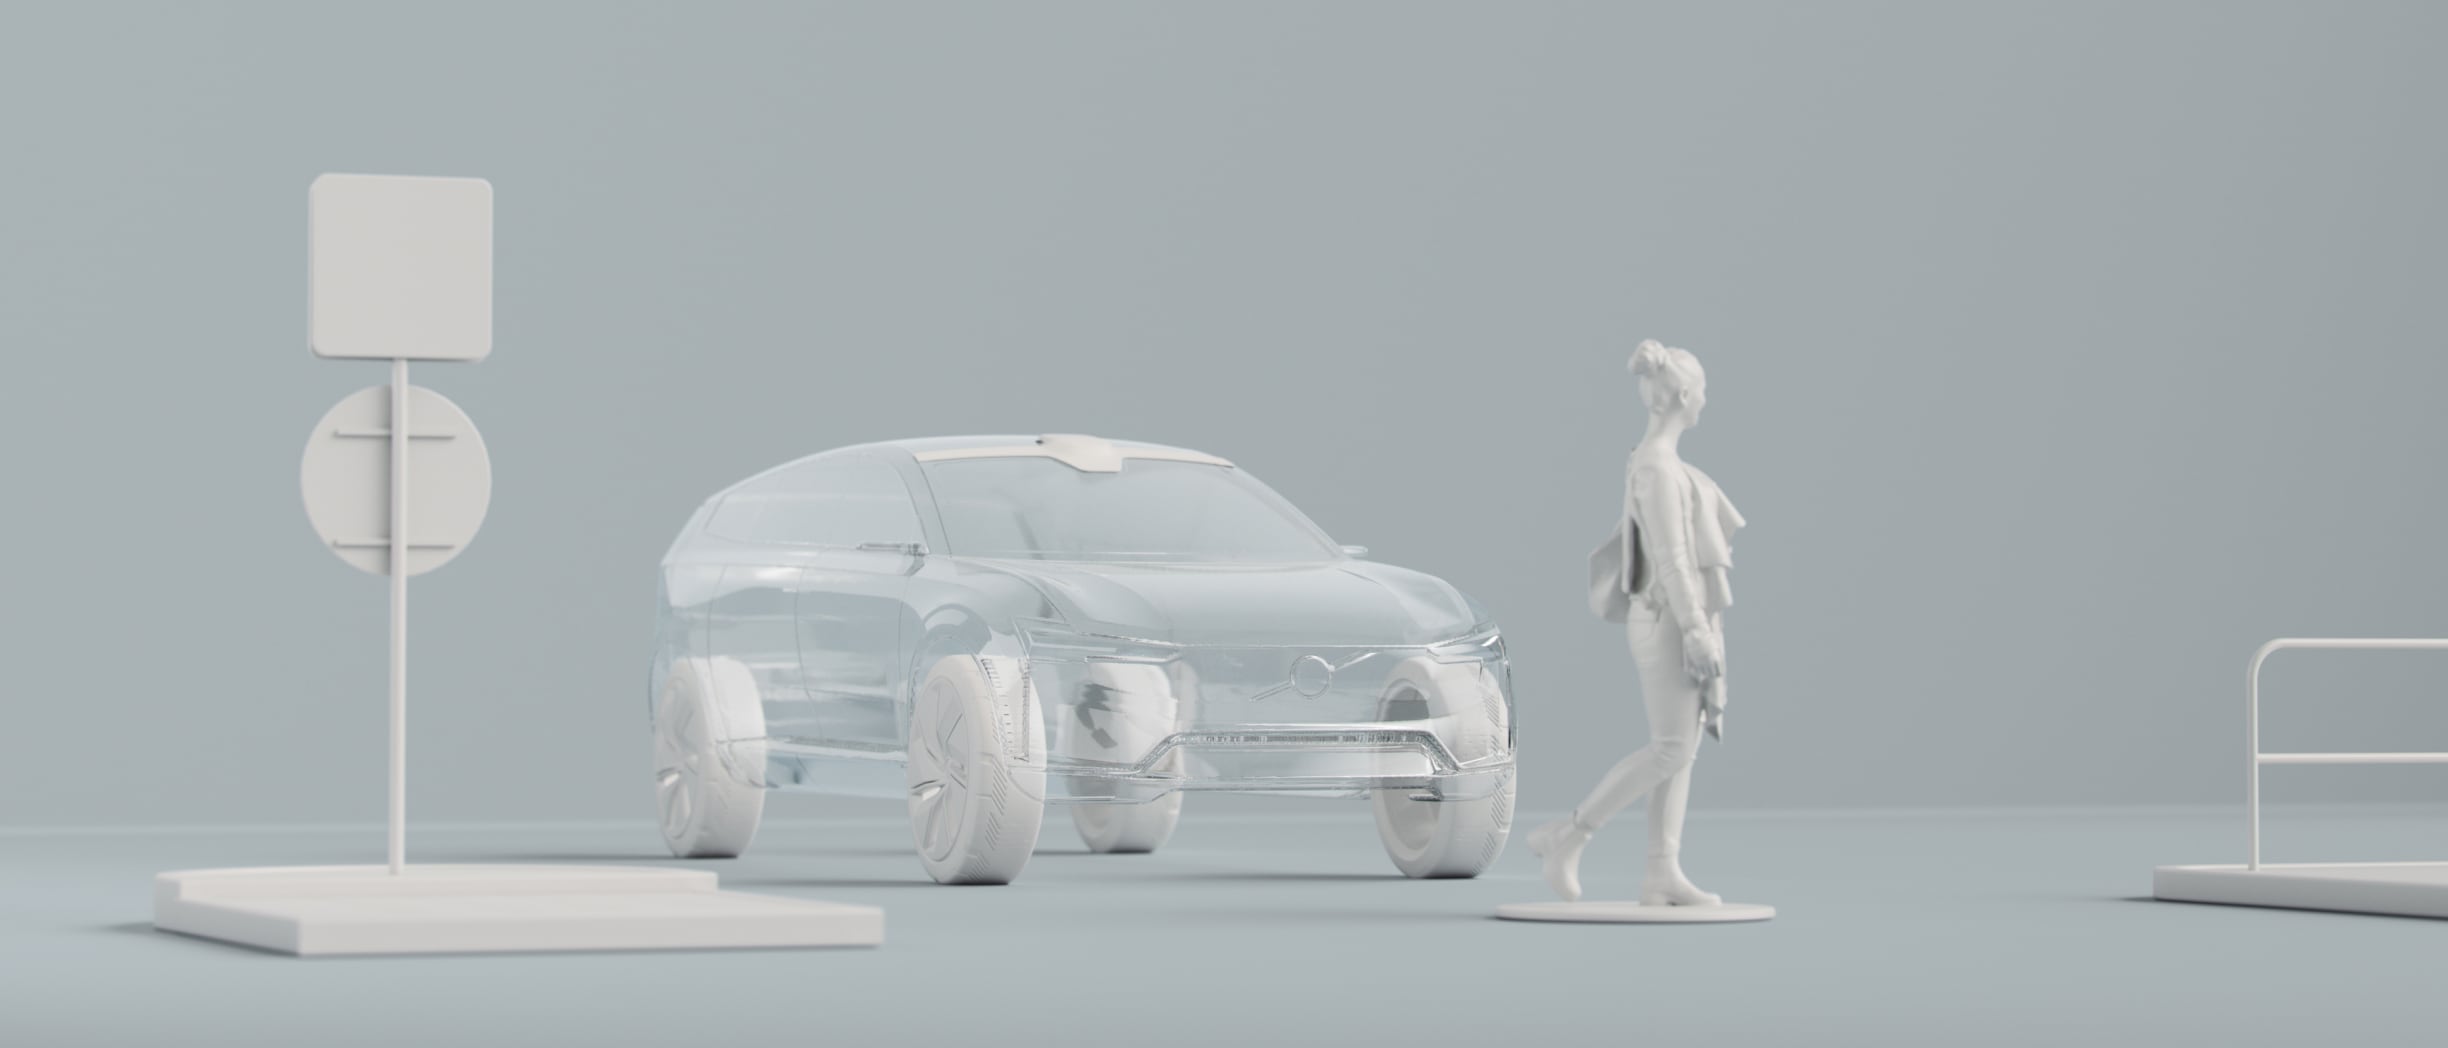 A digital rendering of a car outline, a person and other objects.